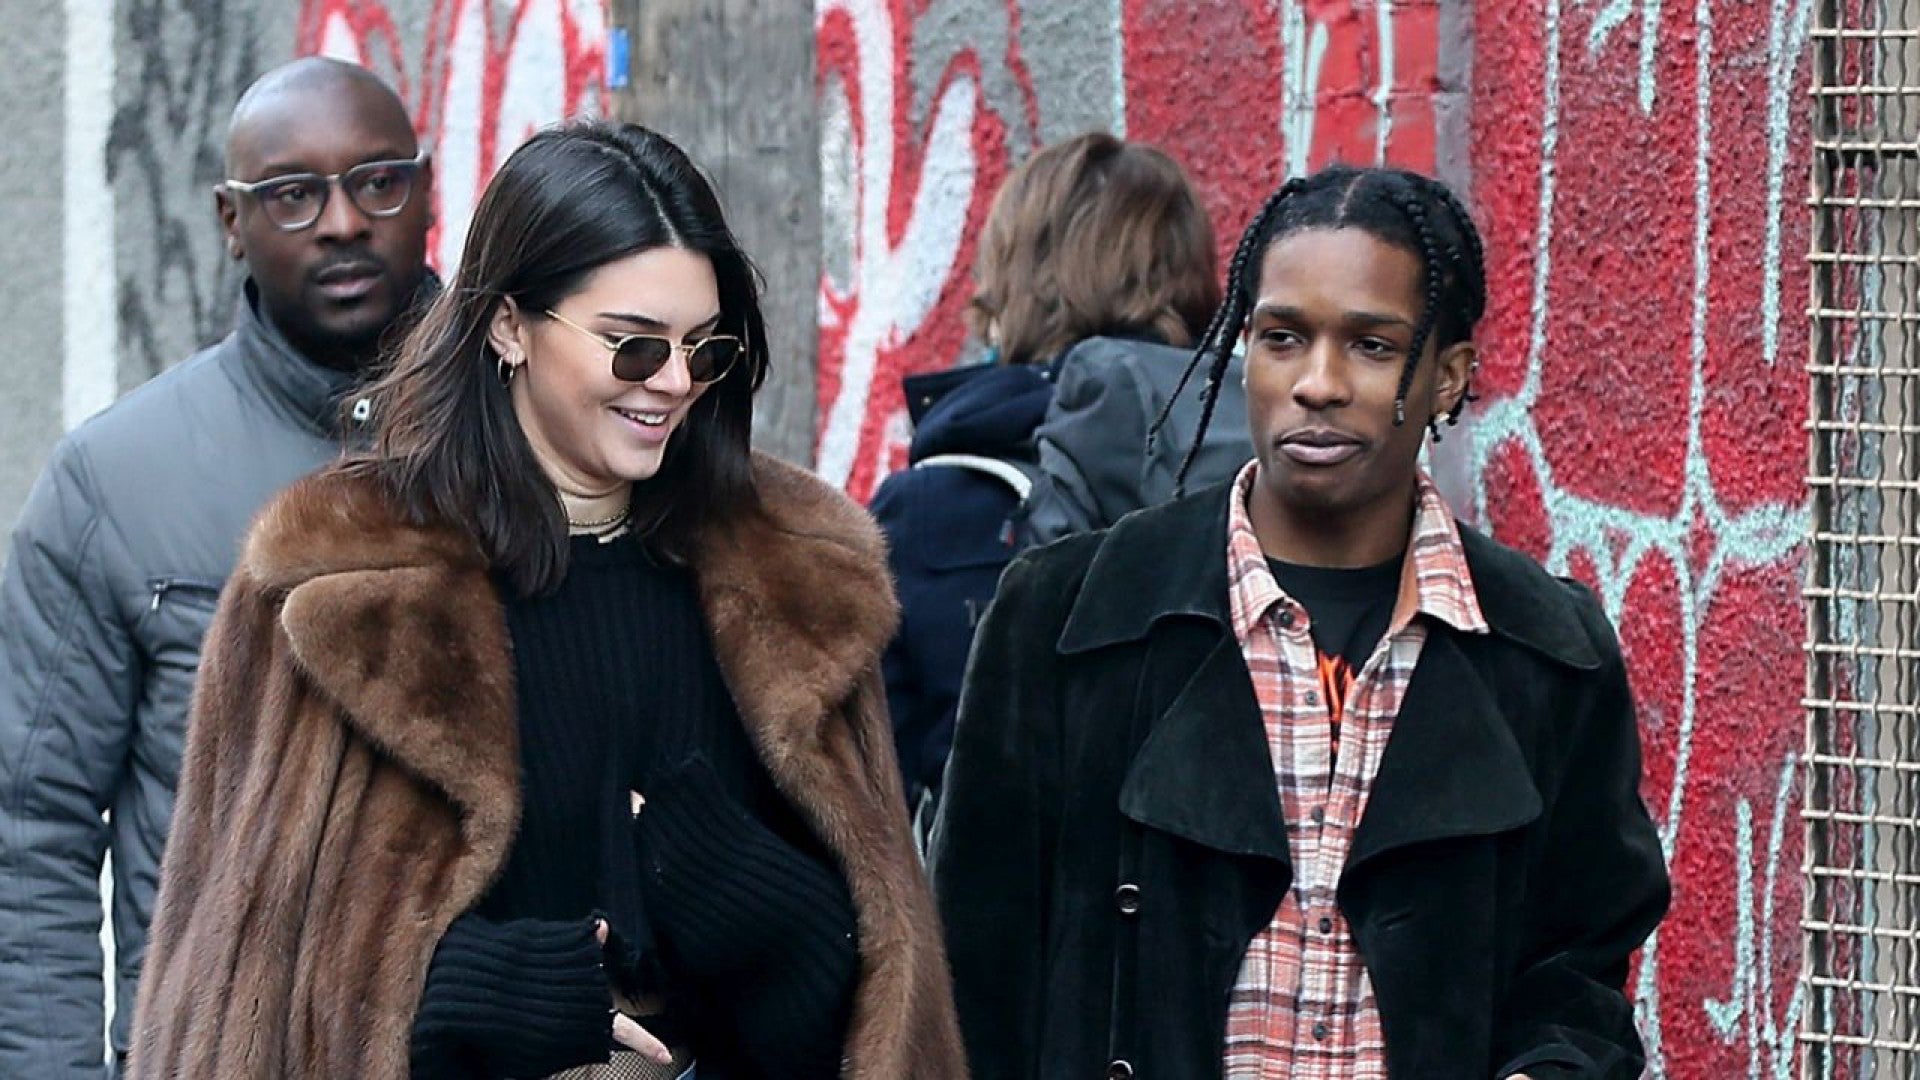 Kendall Jenner and A$AP Rocky: What We Know